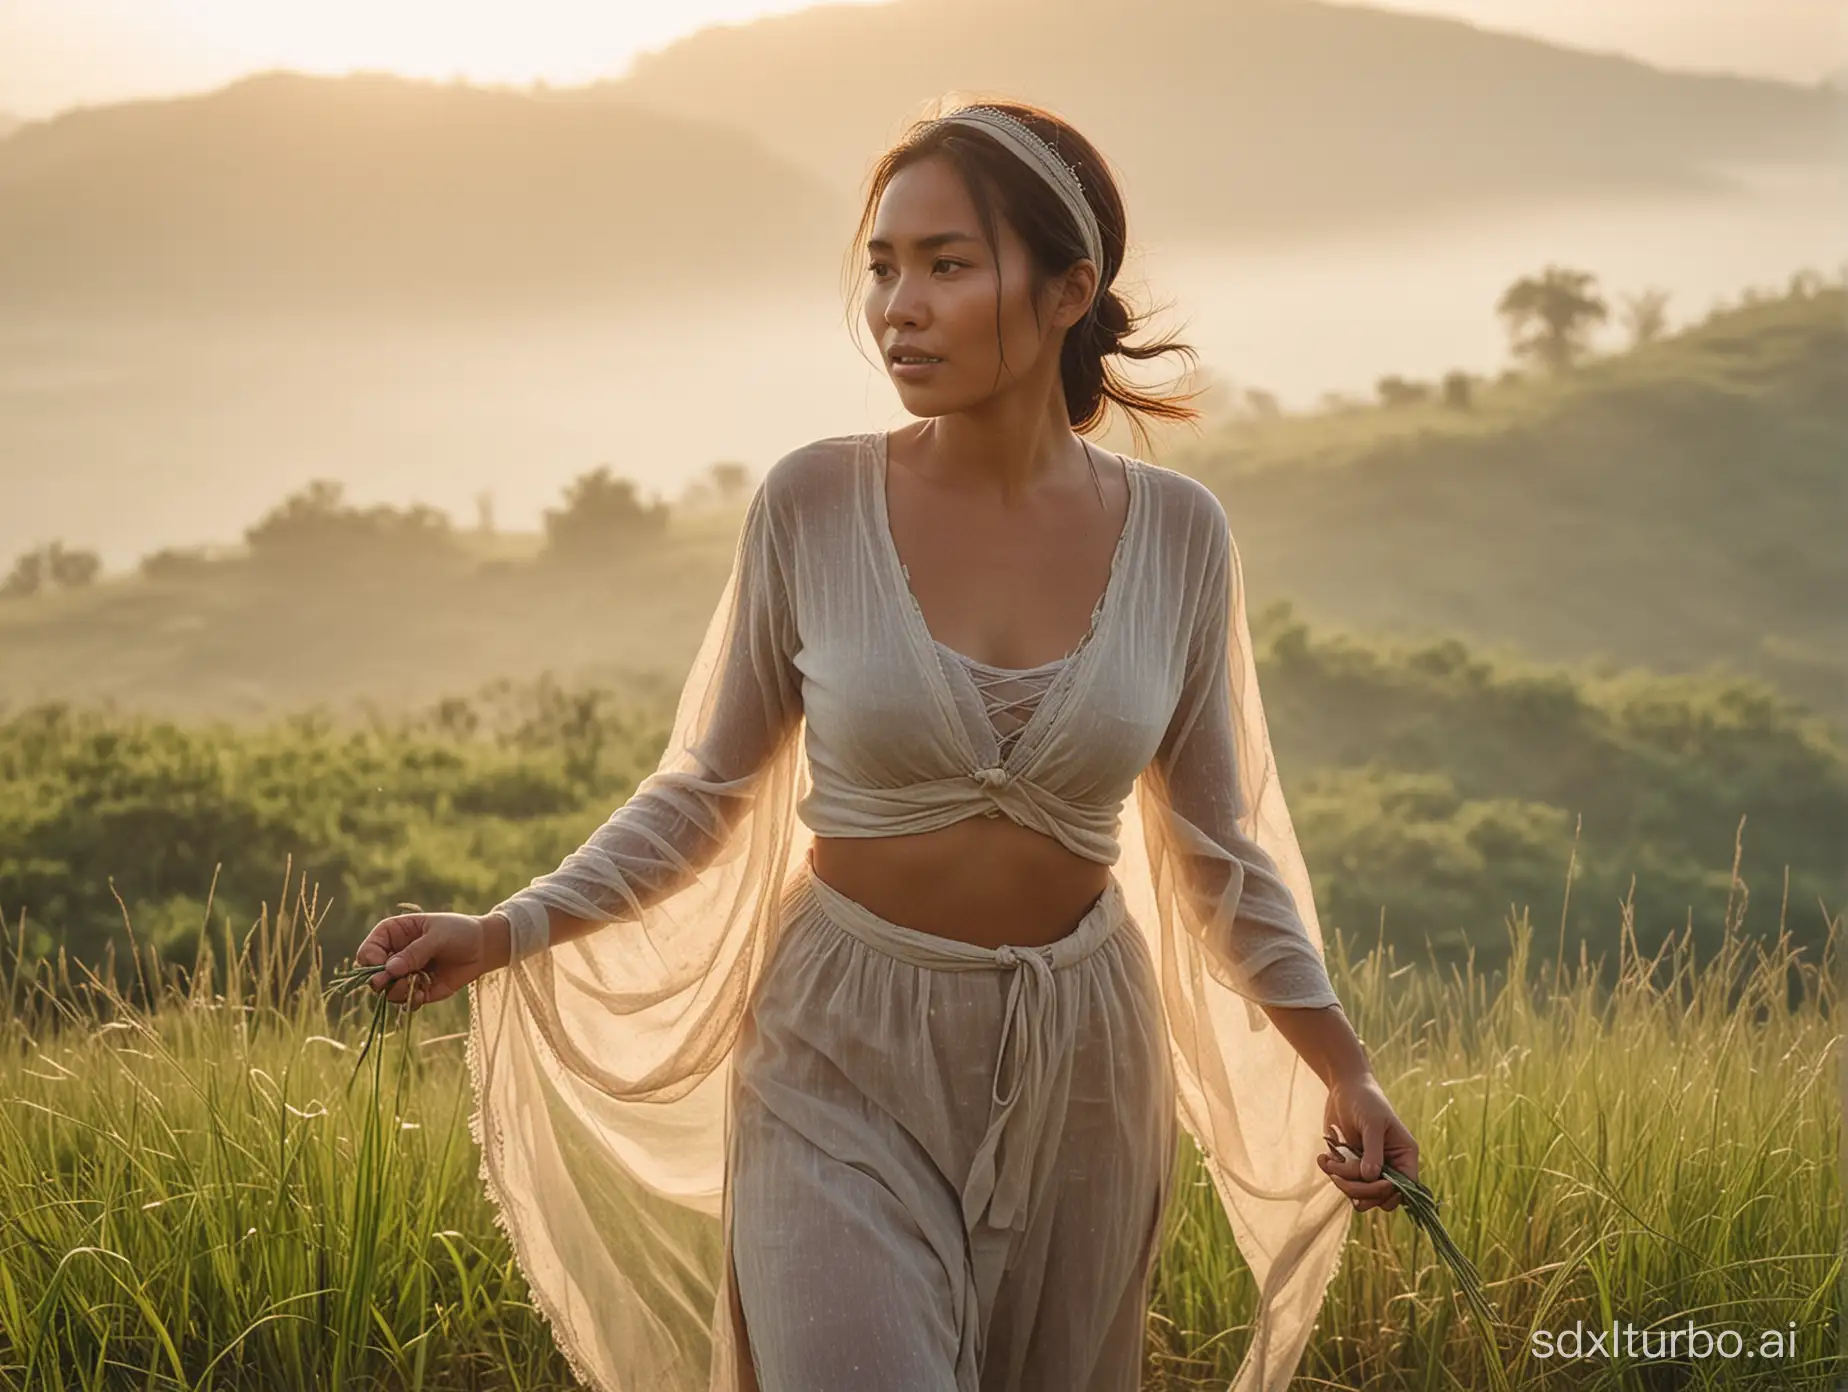 40 years old filipina lady cutting high grass on hilltop in morning mist. Sunrise, sun rays. Wearing cropped open front loincloth shirt. Revealing. Profusely sweating. Headband. Medieval time. Film grain, soft lighting. Bokeh. Thick Legs revealed. Freckles skin. Small flat breasts. Hair tied. Contour of mountains in background. Full body from side